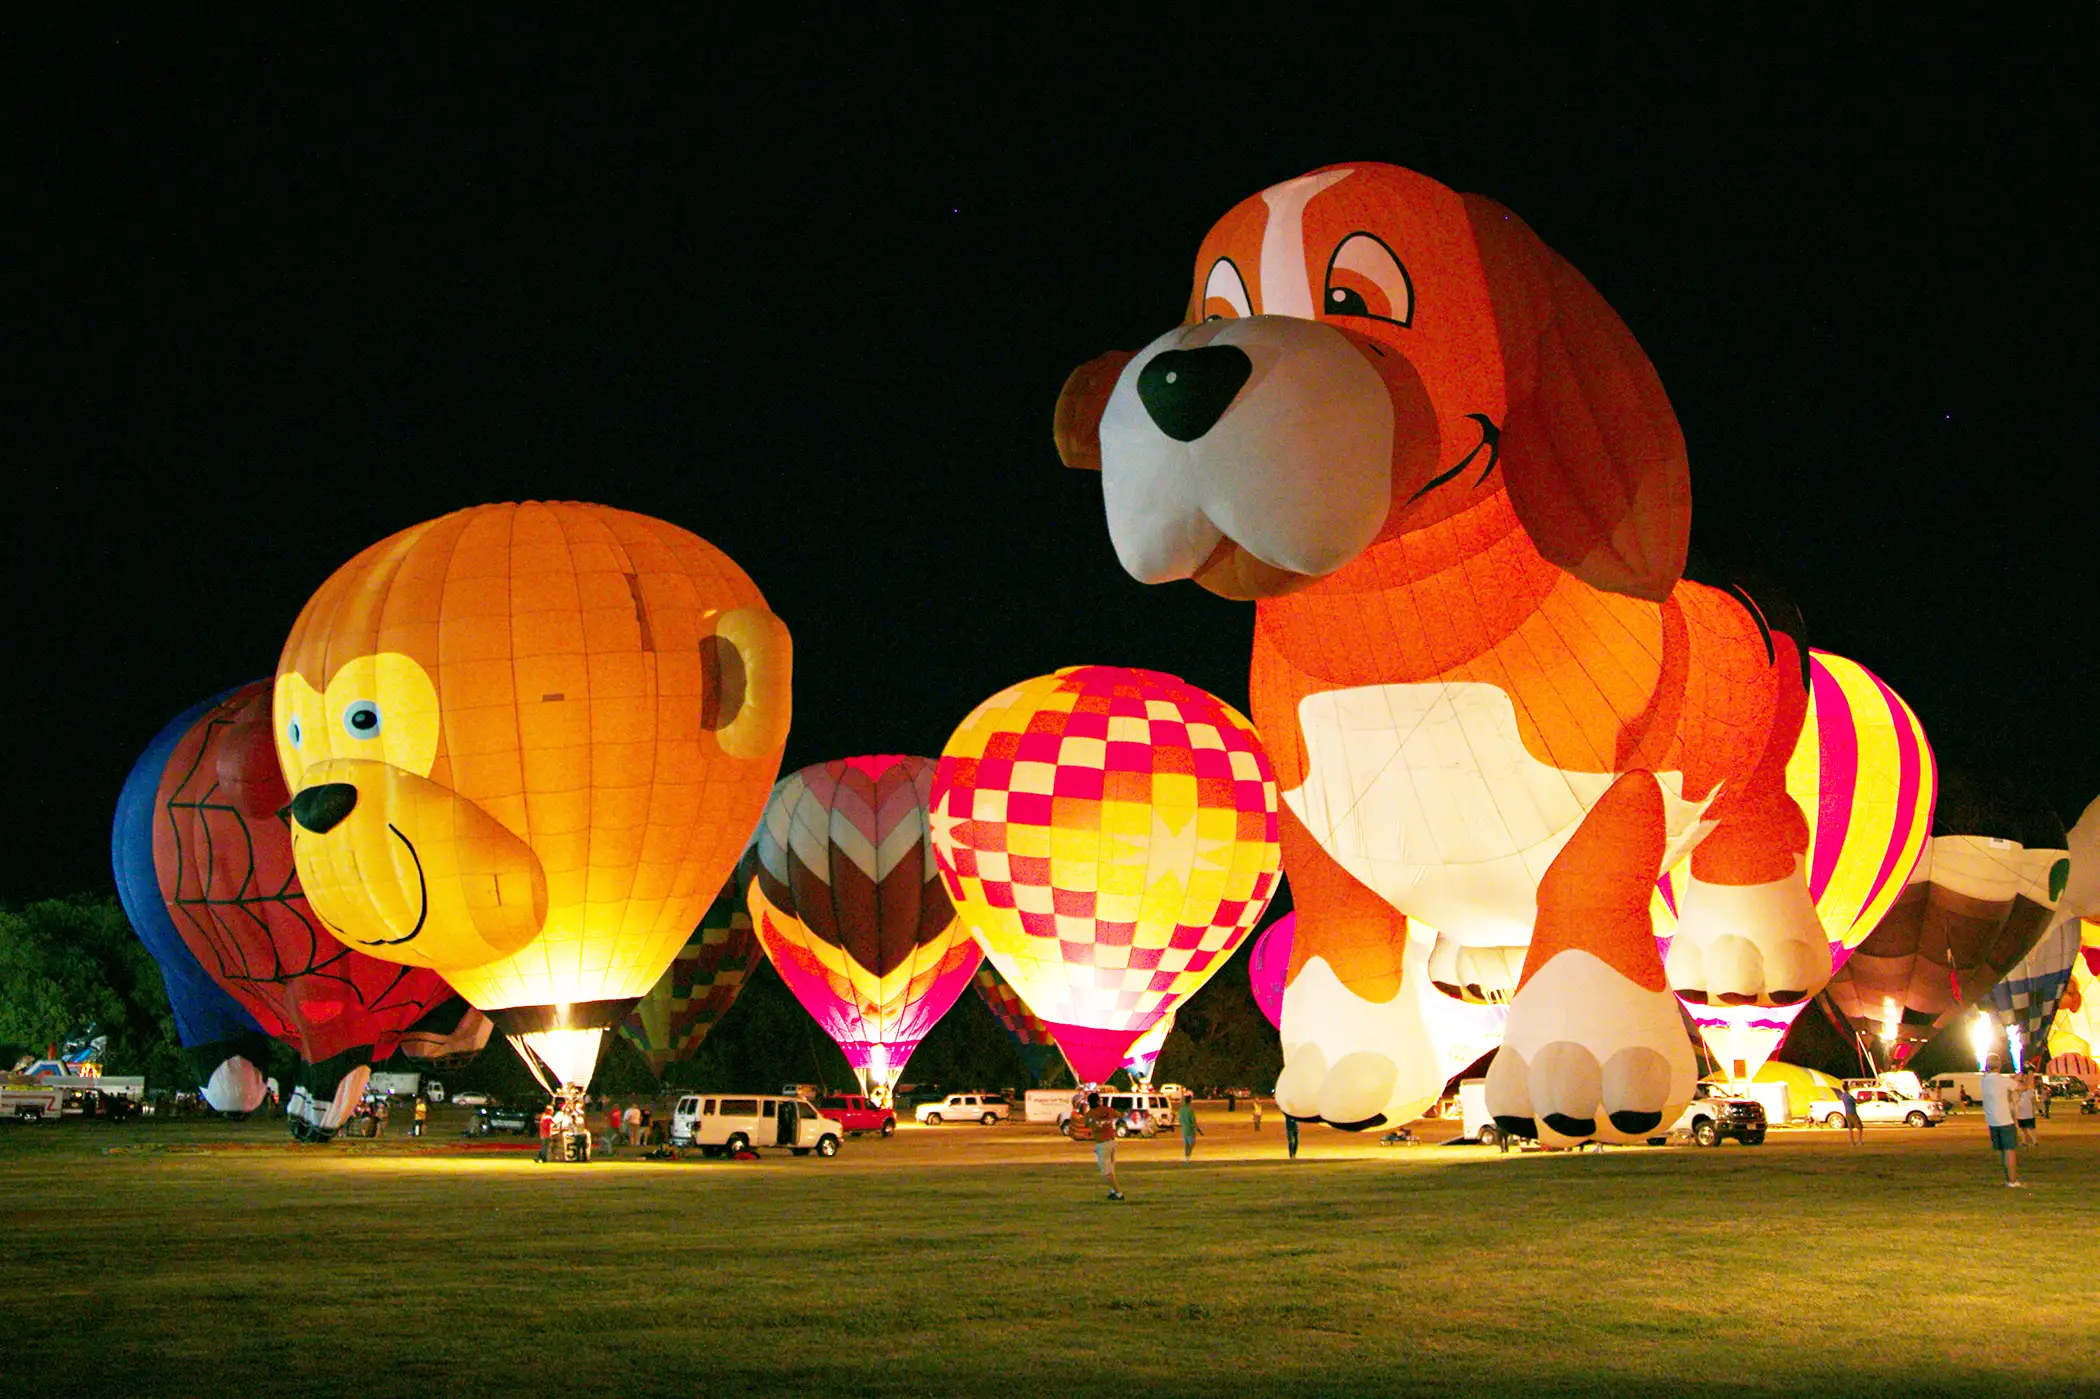 Plano, Texas.  The Plano Balloon Festival has become a signature annual event every fall. The rest of the year, Plano is known for making good on its motto— A great place to do business,  which has helped draw companies including J.C. Penney, Frito-Lay, and Bank of America to town.